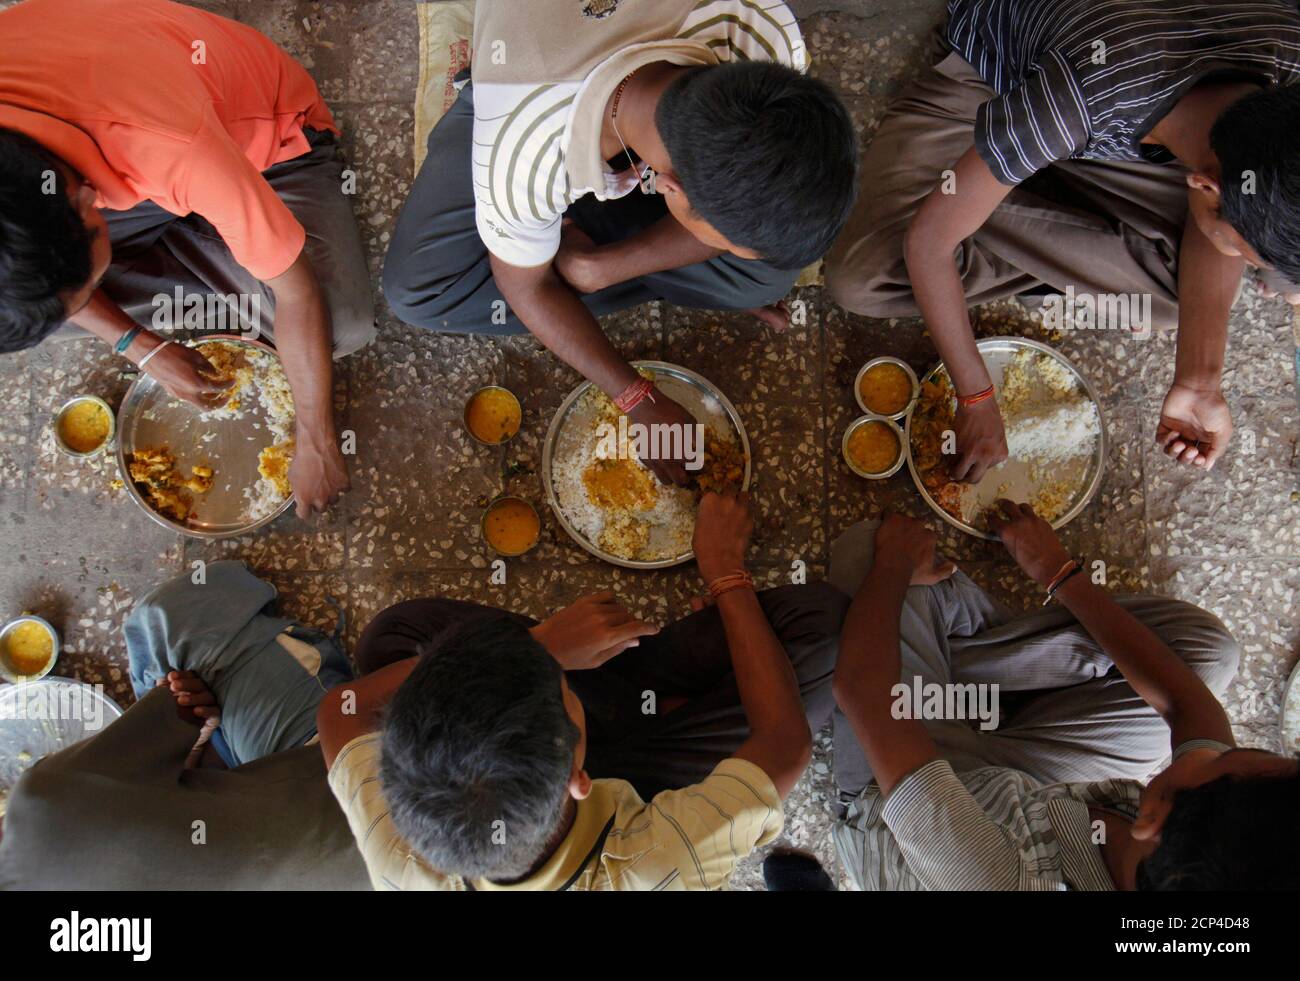 Unmarried men eat their lunch in the remote village of Siyani, where they also live and work in, about 140km (86 miles) west of Gujarat's capital Ahmedabad, October 5, 2011. Siyani is typical of many Indian villages and may be an indicator of things to come as India's male to female ratio declines. The village has some 350 unmarried men over the age of 35 - and hundreds more under 35 - because there aren't enough women to marry. Many women have also left to look elsewhere for grooms with more money and better prospects. Census data released earlier this year revealed there are 914 girls for ev Stock Photo